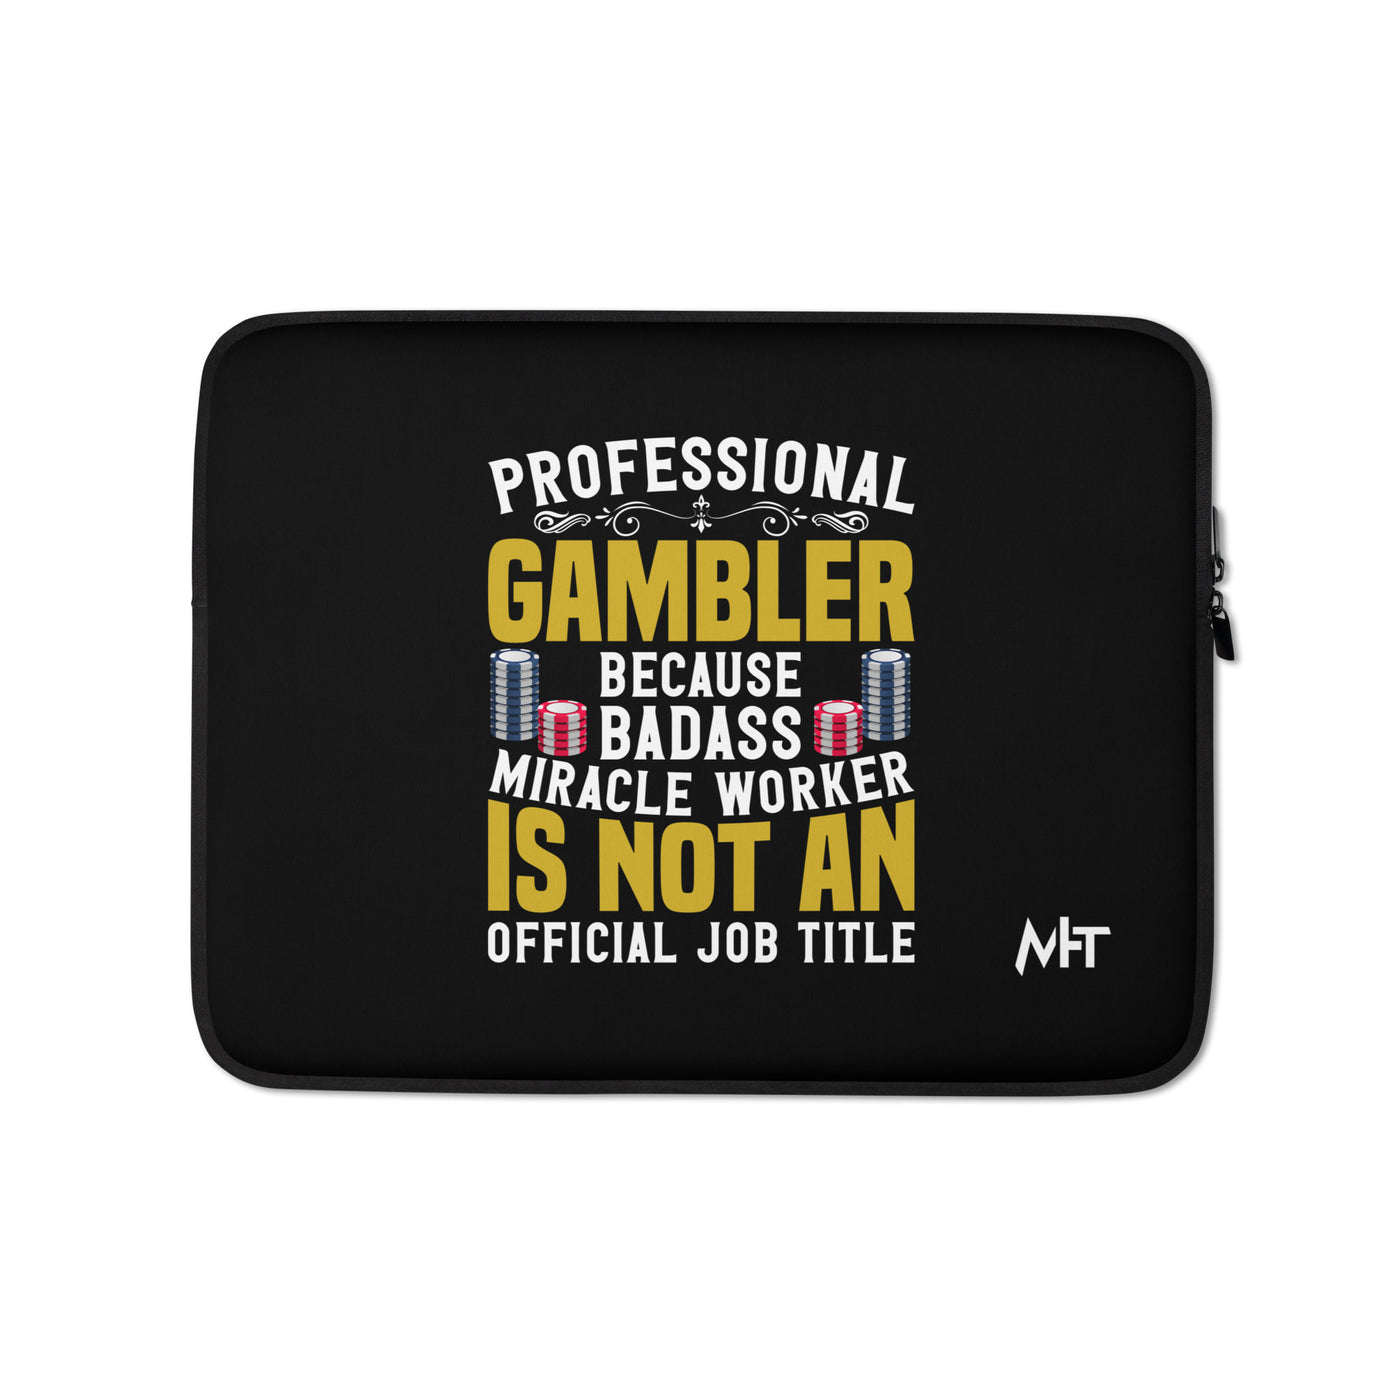 Professional Gambler because Badass Miracle Worker is an official Job Title - Laptop Sleeve